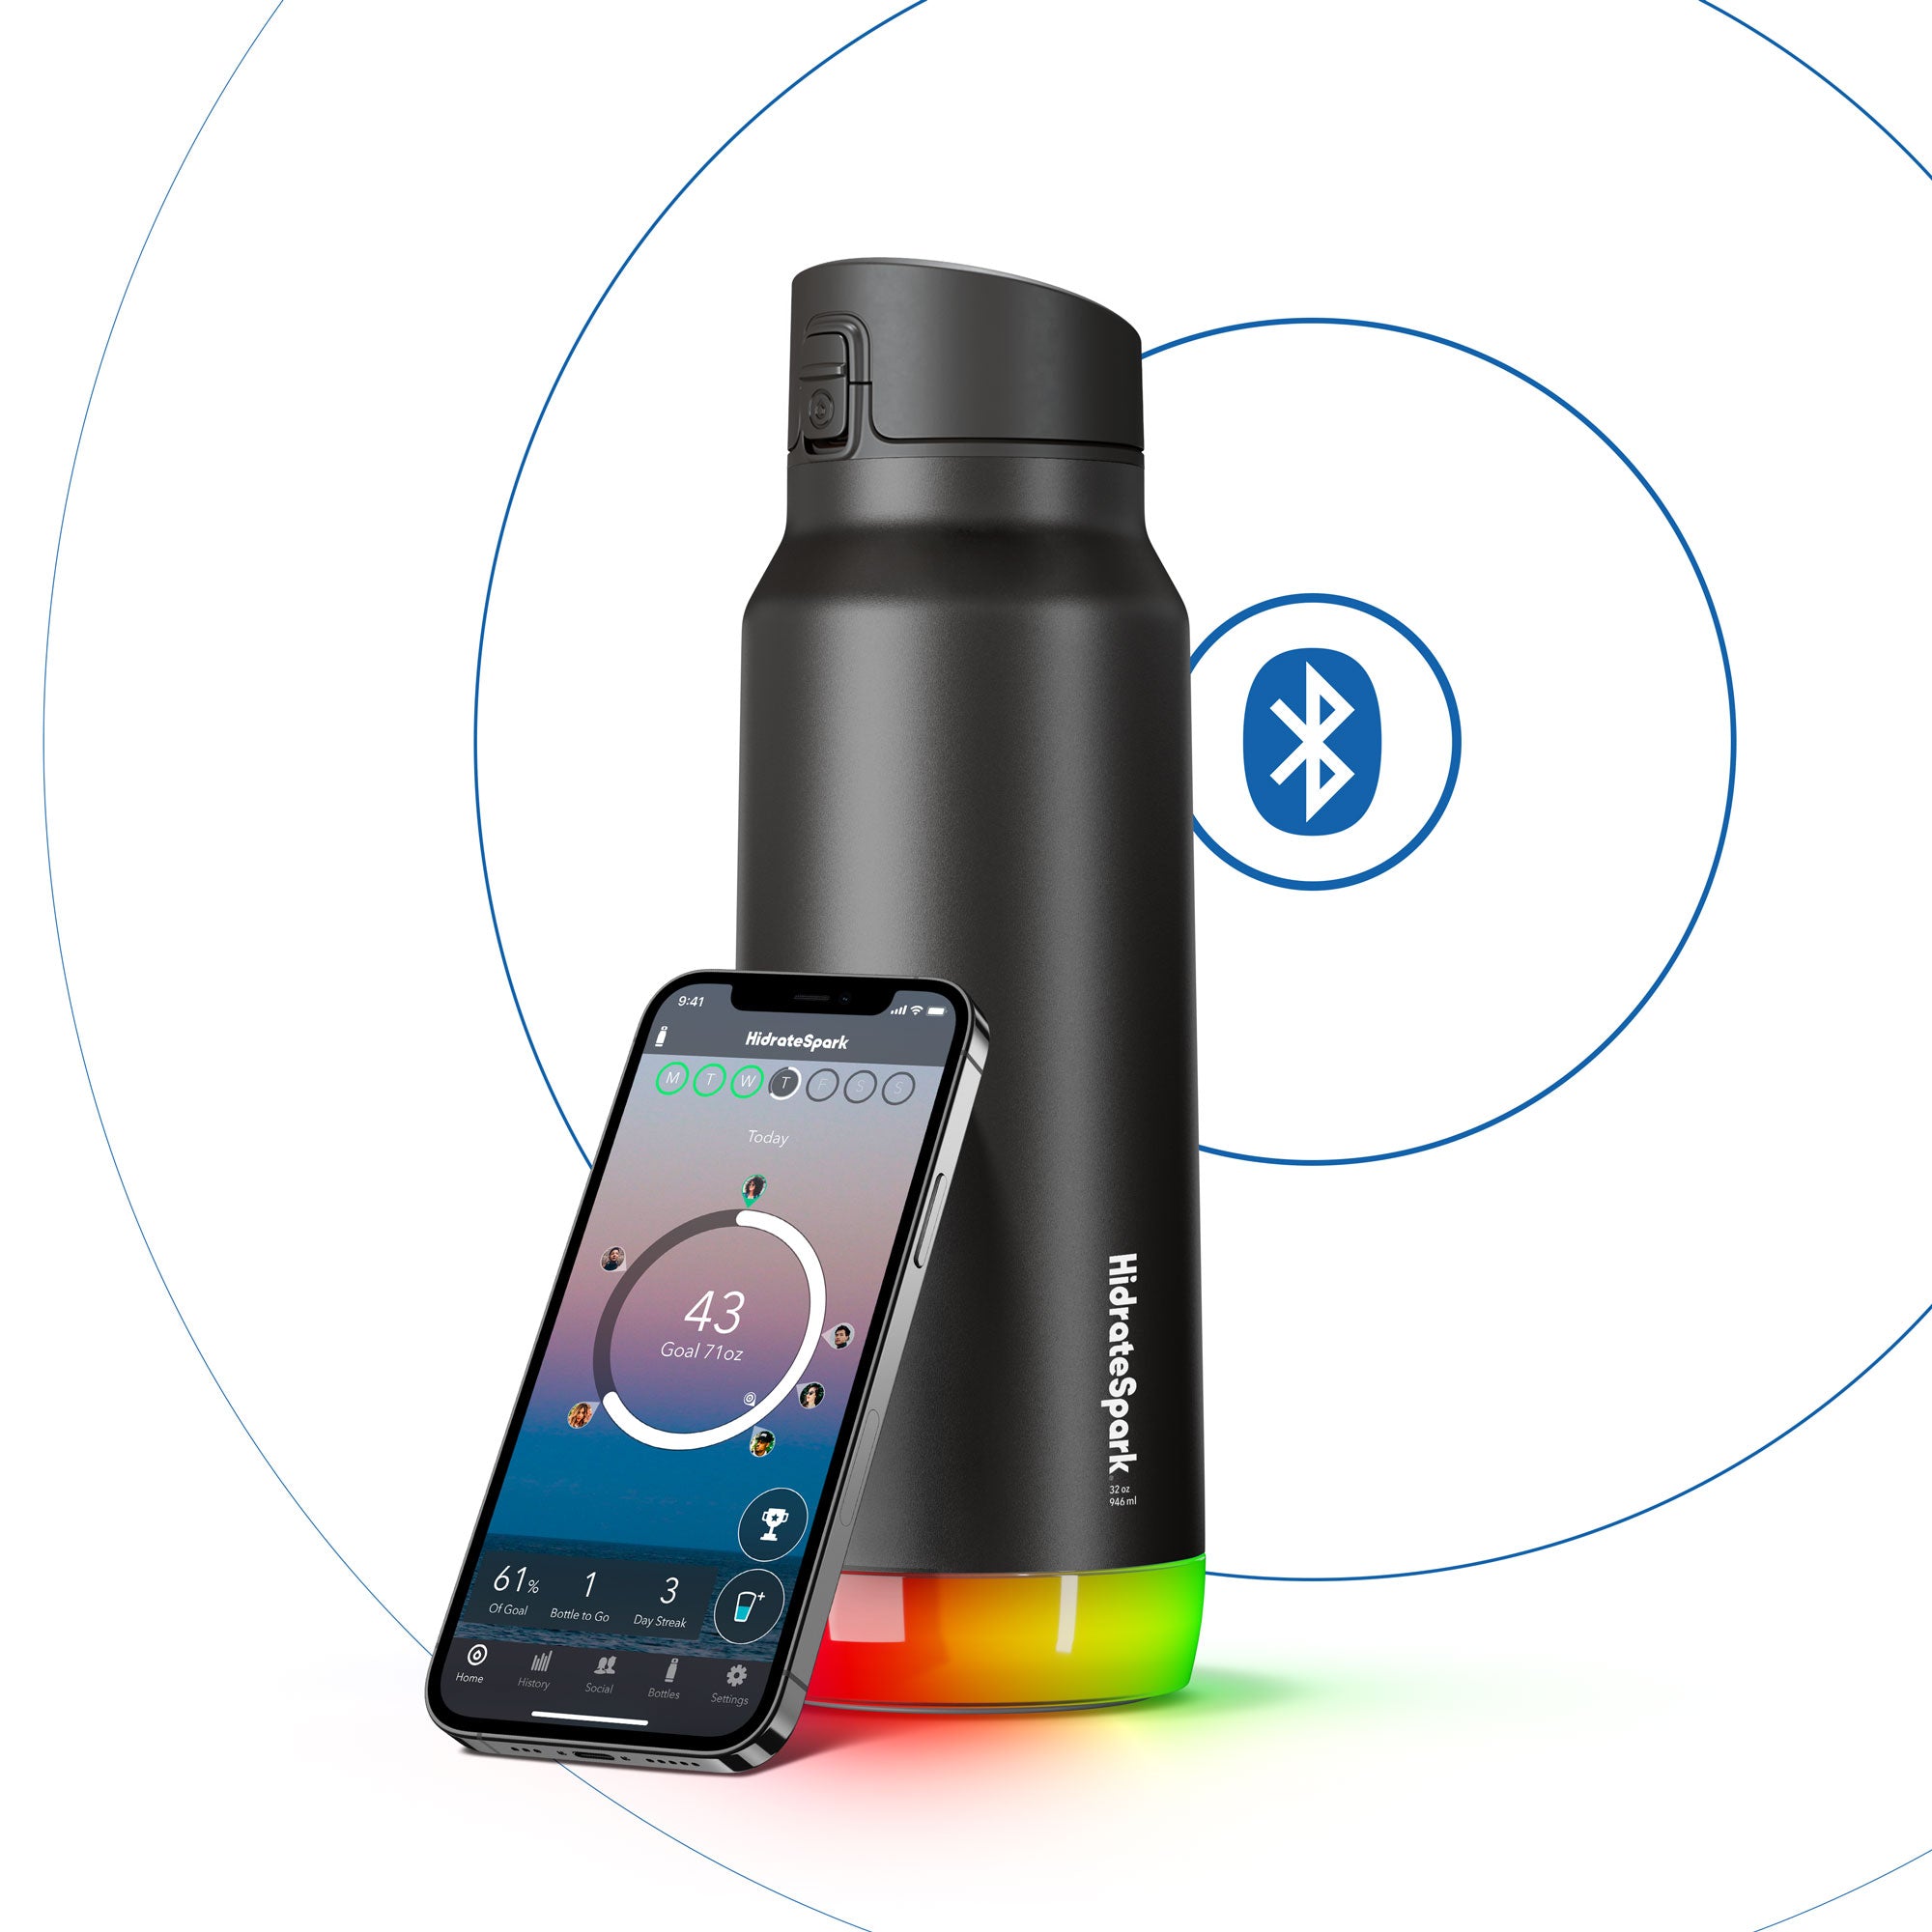 Genuine Thermos® Brand Keeps Customers Connected With New Hydration Bottle  With Smart Lid